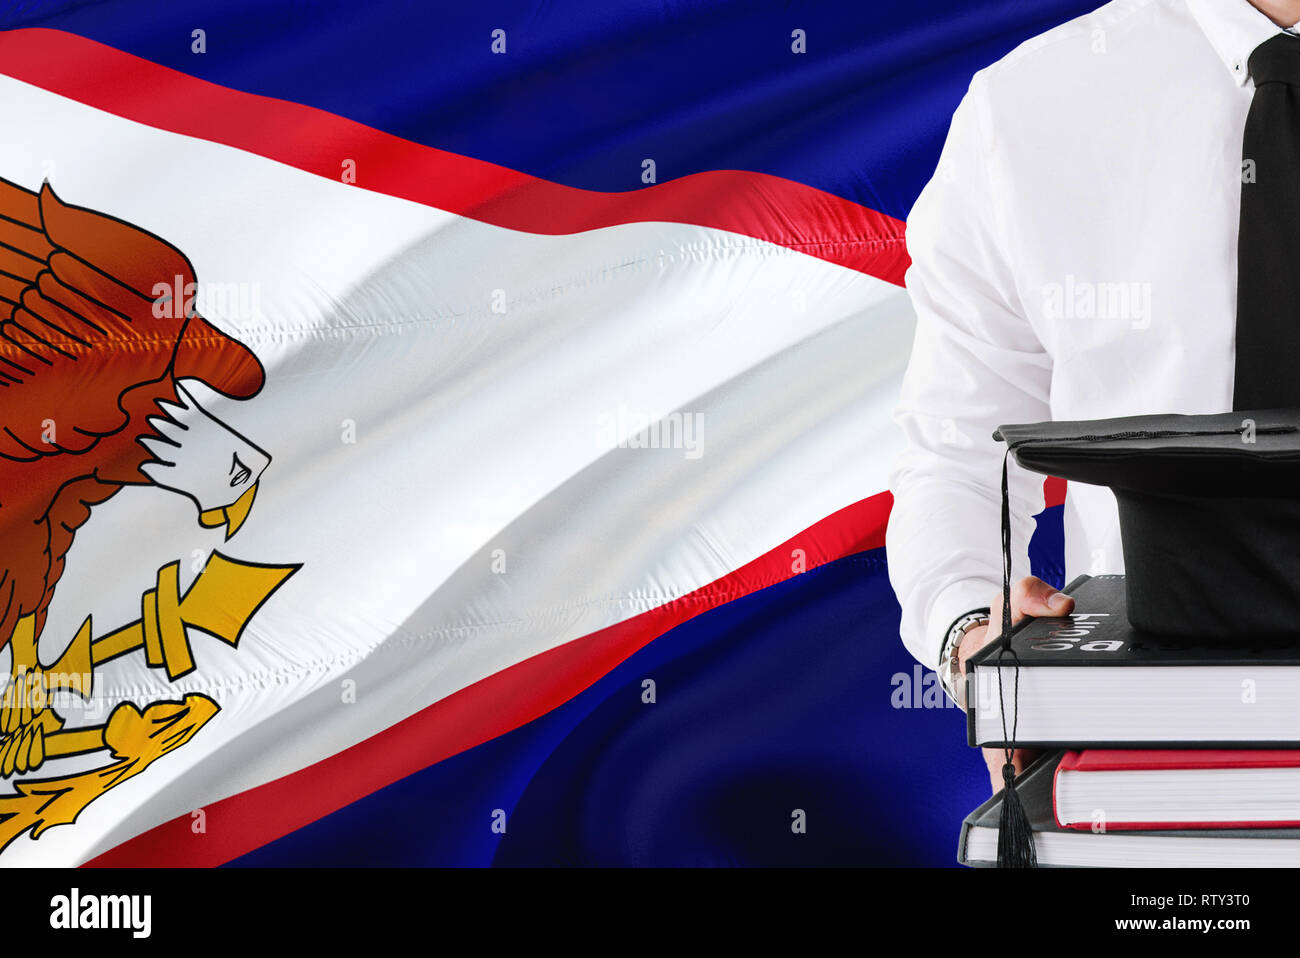 Successful student education concept. Holding books and graduation cap over American Samoa flag background. Stock Photo